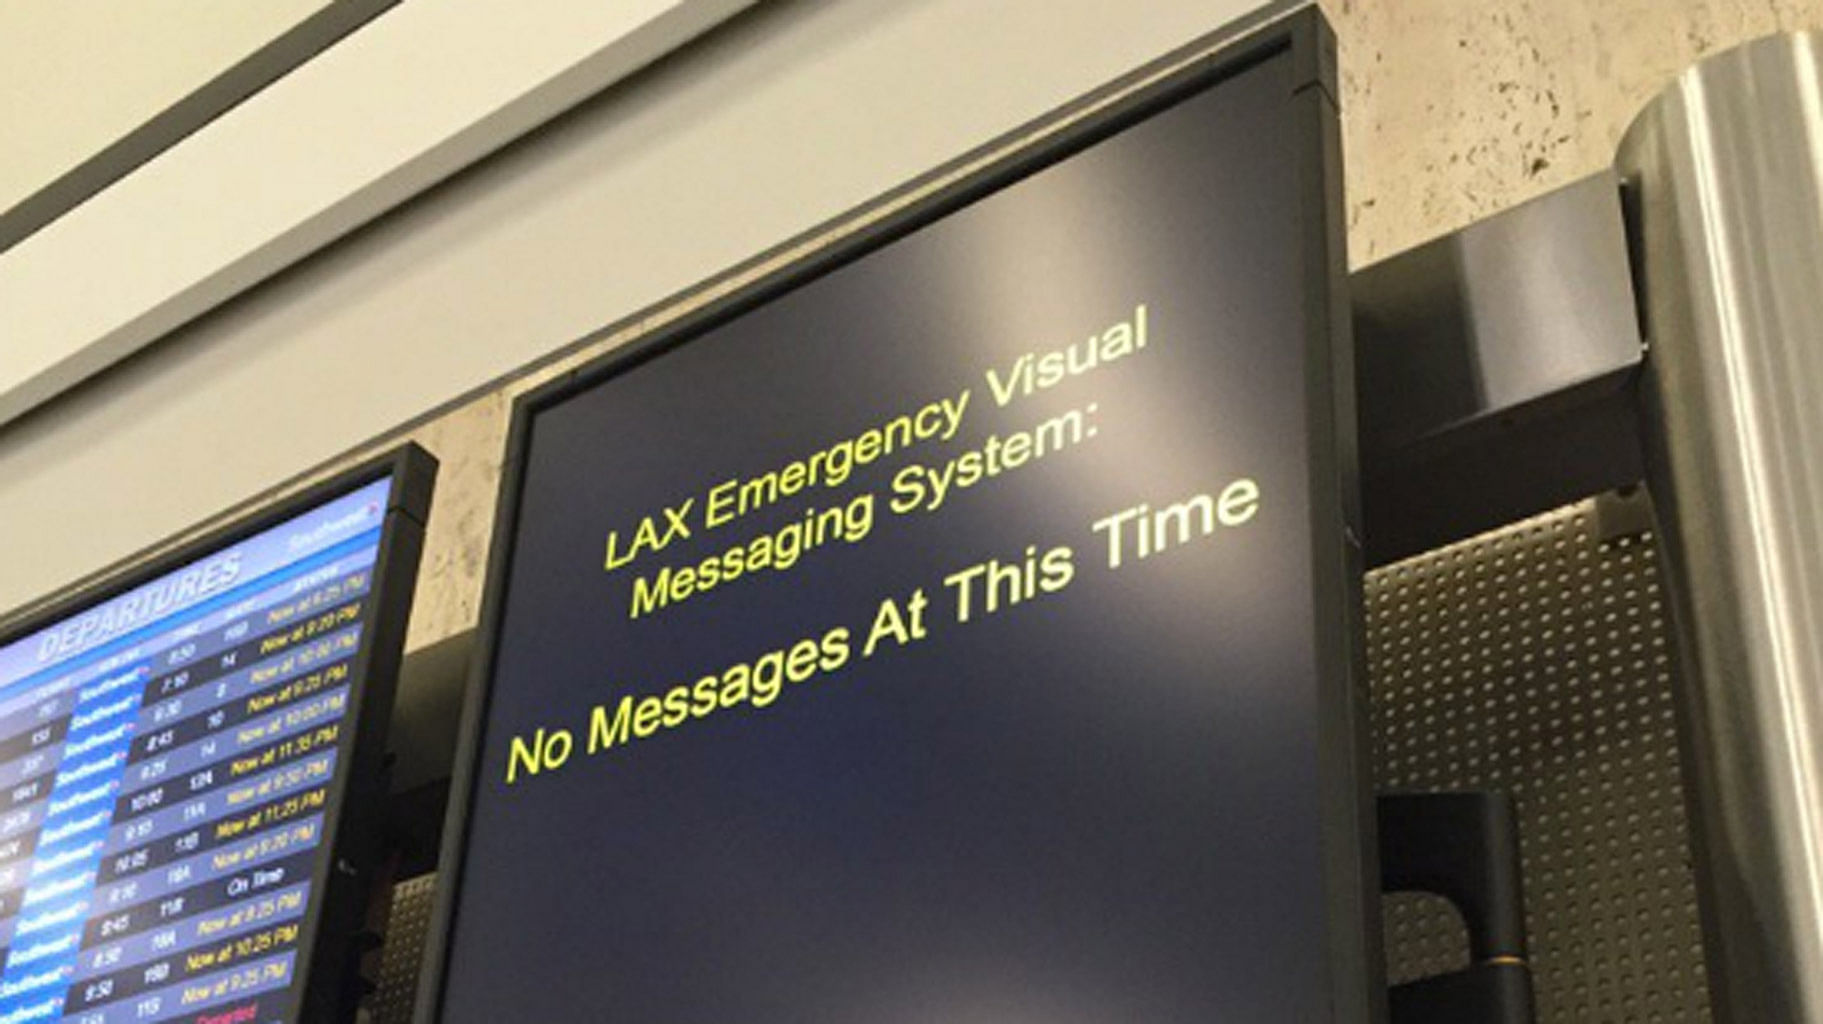 An emergency message being displayed in LA airport. (Photo Courtesy: Twitter/<a href="https://twitter.com/ProducerAli">@ProducerAli</a>)